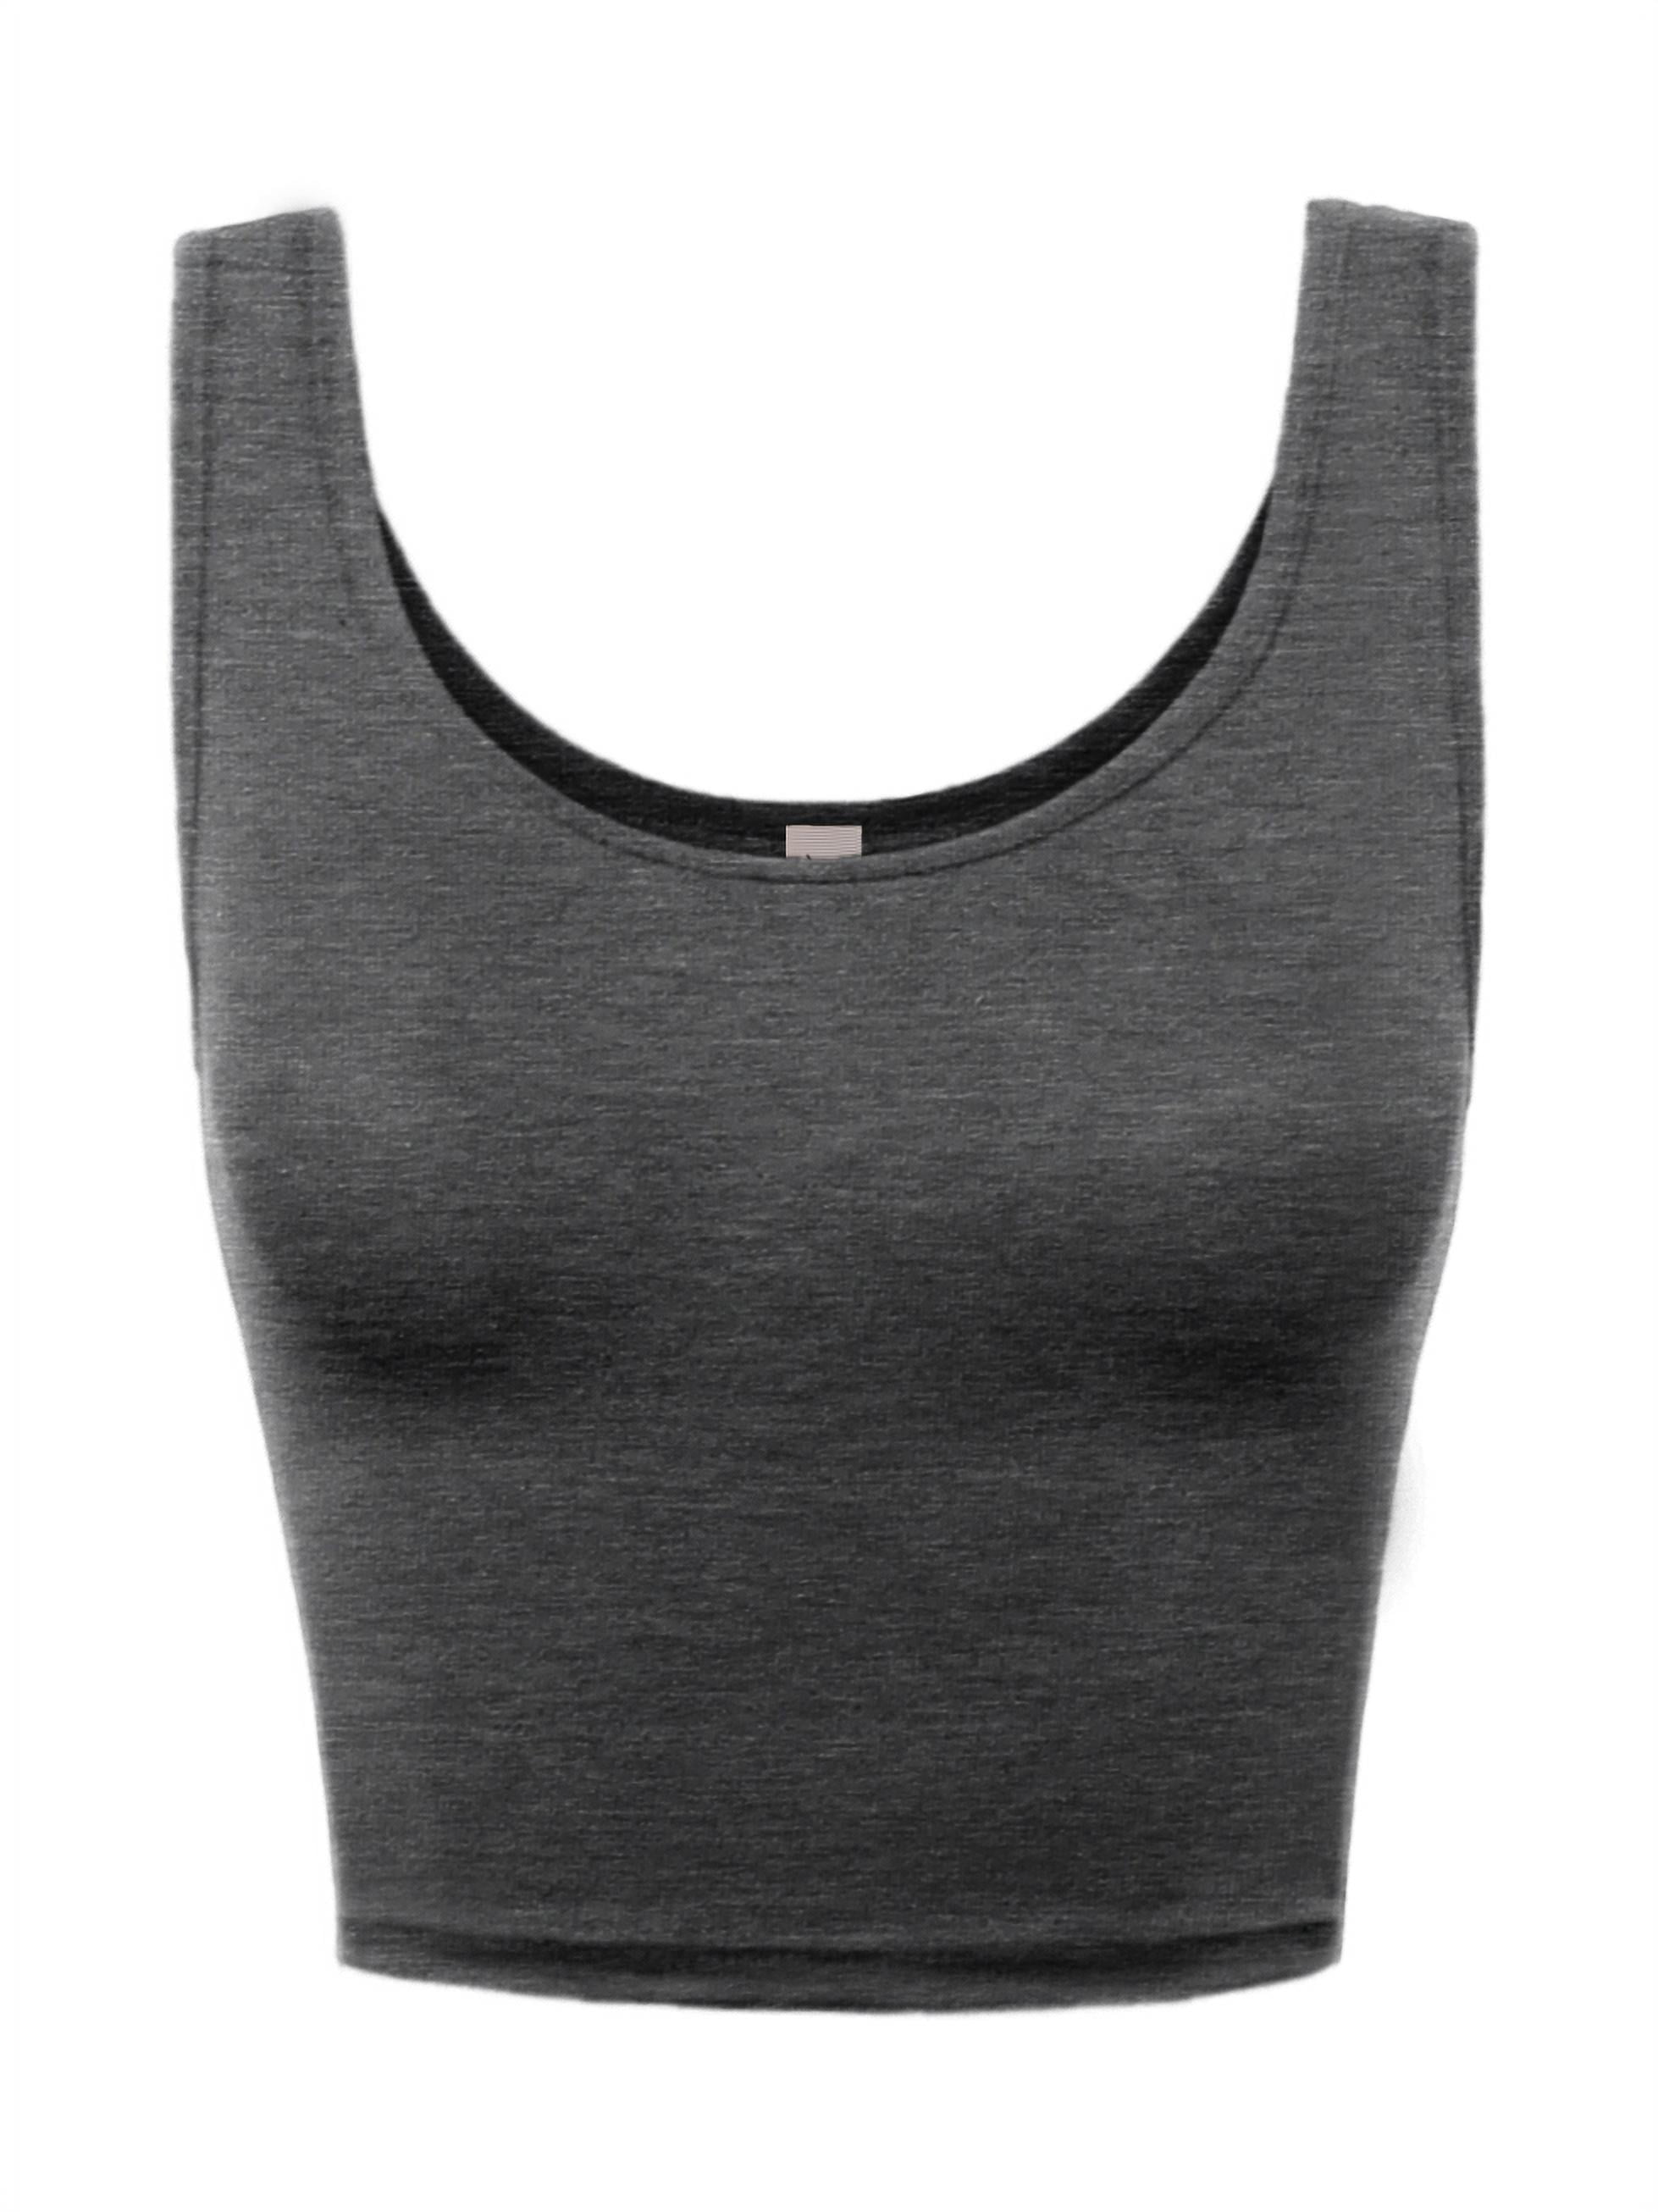 A2Y Women's Fitted Rayon Scoop Neck Sleeveless Crop Tank Top Black S 